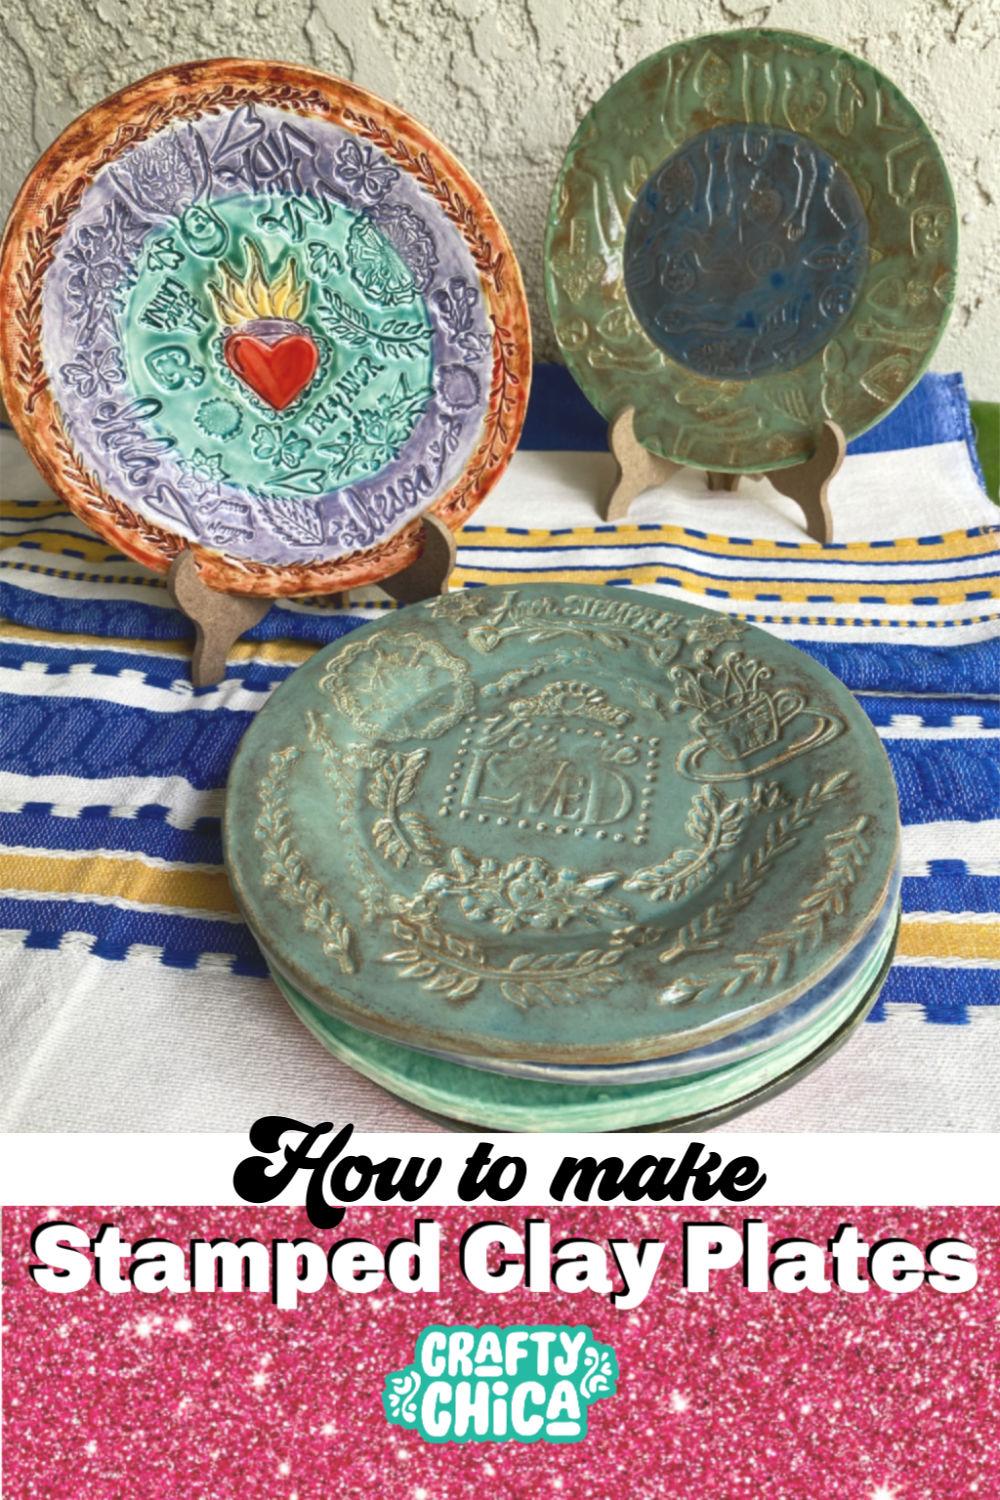 How to make ceramic stamped clay plates! #craftychica #stampedclay #ceramics